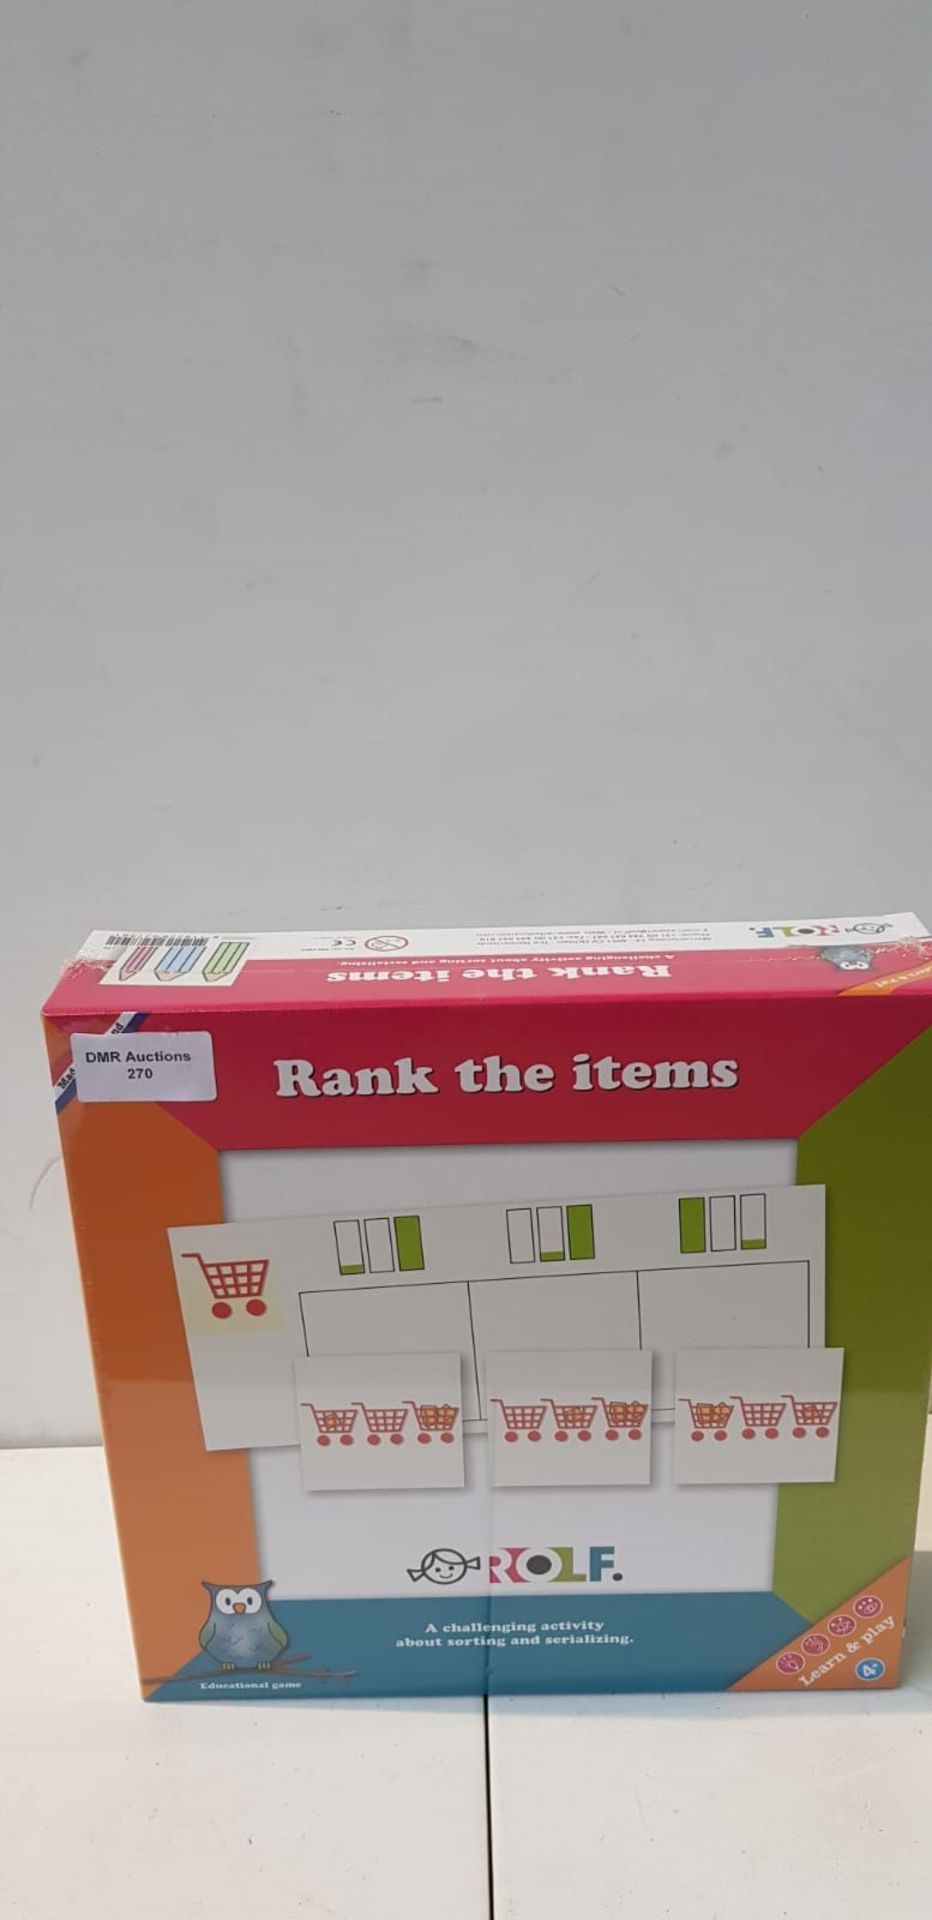 1 BRAND NEW BOXED ROLF RANK THE ITEMS EDUCATION AC